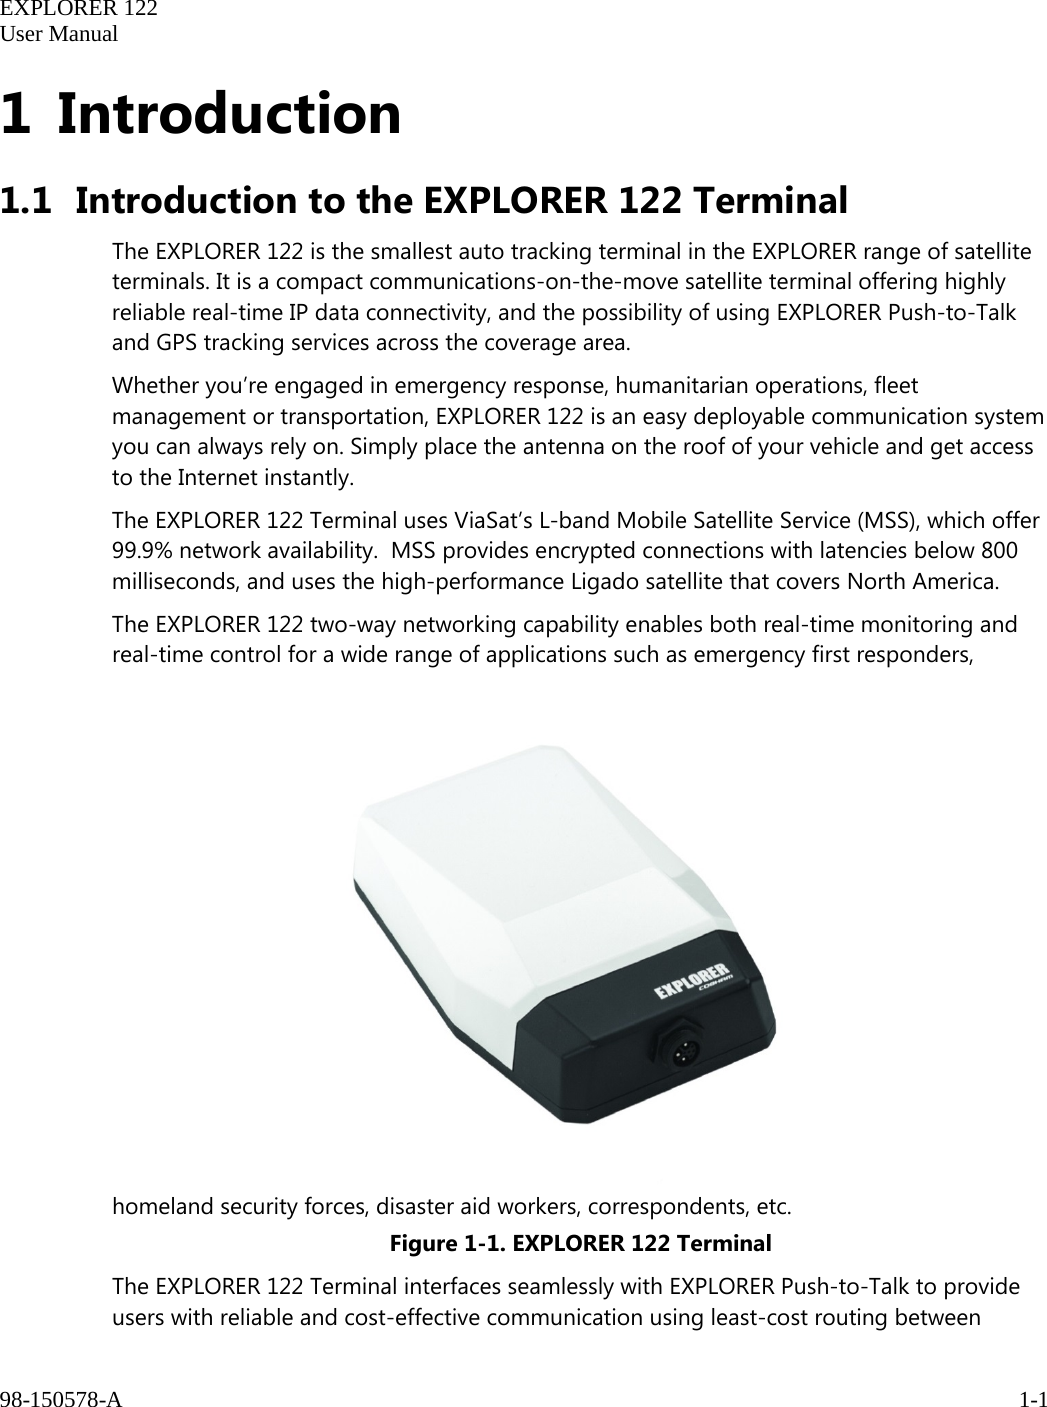   EXPLORER 122  User Manual  98-150578-A     1-1   1 Introduction 1.1 Introduction to the EXPLORER 122 Terminal  The EXPLORER 122 is the smallest auto tracking terminal in the EXPLORER range of satellite terminals. It is a compact communications-on-the-move satellite terminal offering highly reliable real-time IP data connectivity, and the possibility of using EXPLORER Push-to-Talk and GPS tracking services across the coverage area. Whether you’re engaged in emergency response, humanitarian operations, fleet management or transportation, EXPLORER 122 is an easy deployable communication system you can always rely on. Simply place the antenna on the roof of your vehicle and get access to the Internet instantly.  The EXPLORER 122 Terminal uses ViaSat’s L-band Mobile Satellite Service (MSS), which offer 99.9% network availability.  MSS provides encrypted connections with latencies below 800 milliseconds, and uses the high-performance Ligado satellite that covers North America. The EXPLORER 122 two-way networking capability enables both real-time monitoring and real-time control for a wide range of applications such as emergency first responders, homeland security forces, disaster aid workers, correspondents, etc. Figure 1-1. EXPLORER 122 Terminal The EXPLORER 122 Terminal interfaces seamlessly with EXPLORER Push-to-Talk to provide users with reliable and cost-effective communication using least-cost routing between 